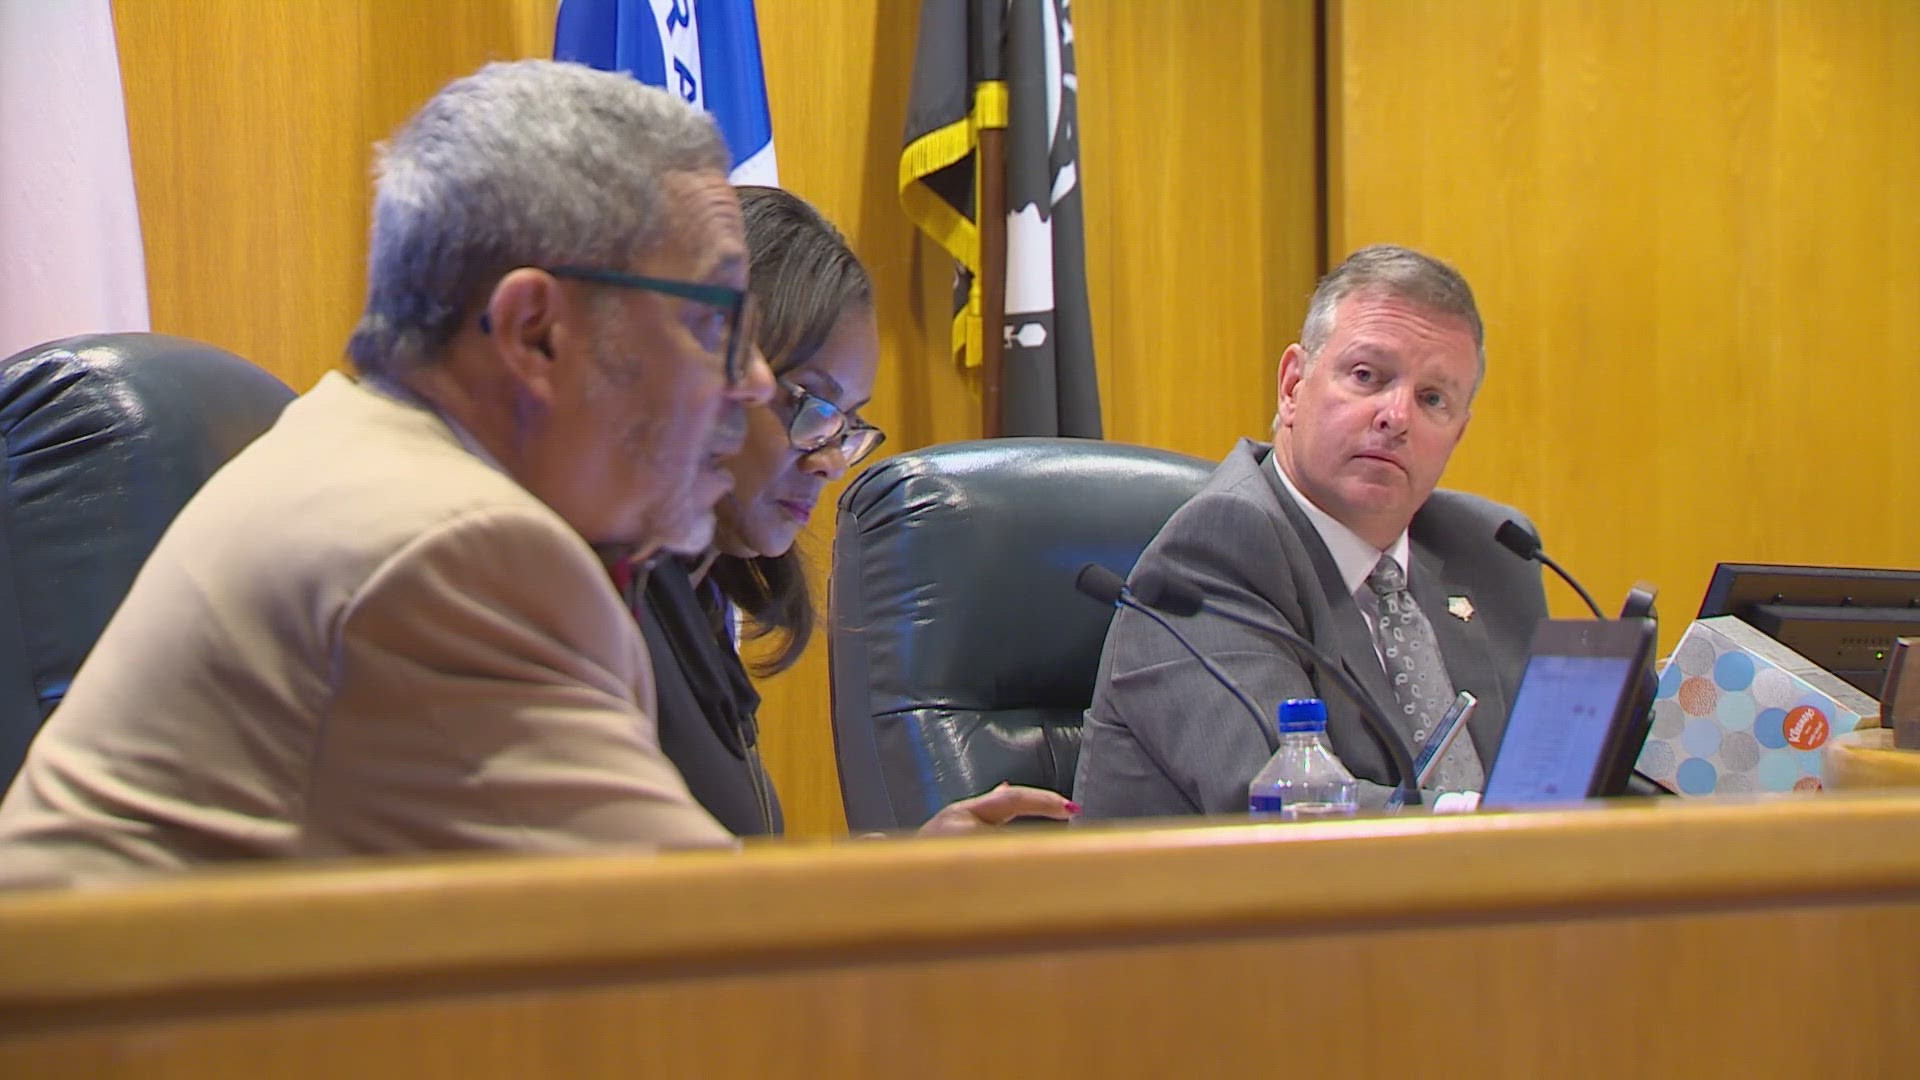 Elections Administrator Heider Garcia resigned Monday and referenced a meeting with County Judge Tim O'Hare as a reason. O'Hare wouldn't share details on their talk.